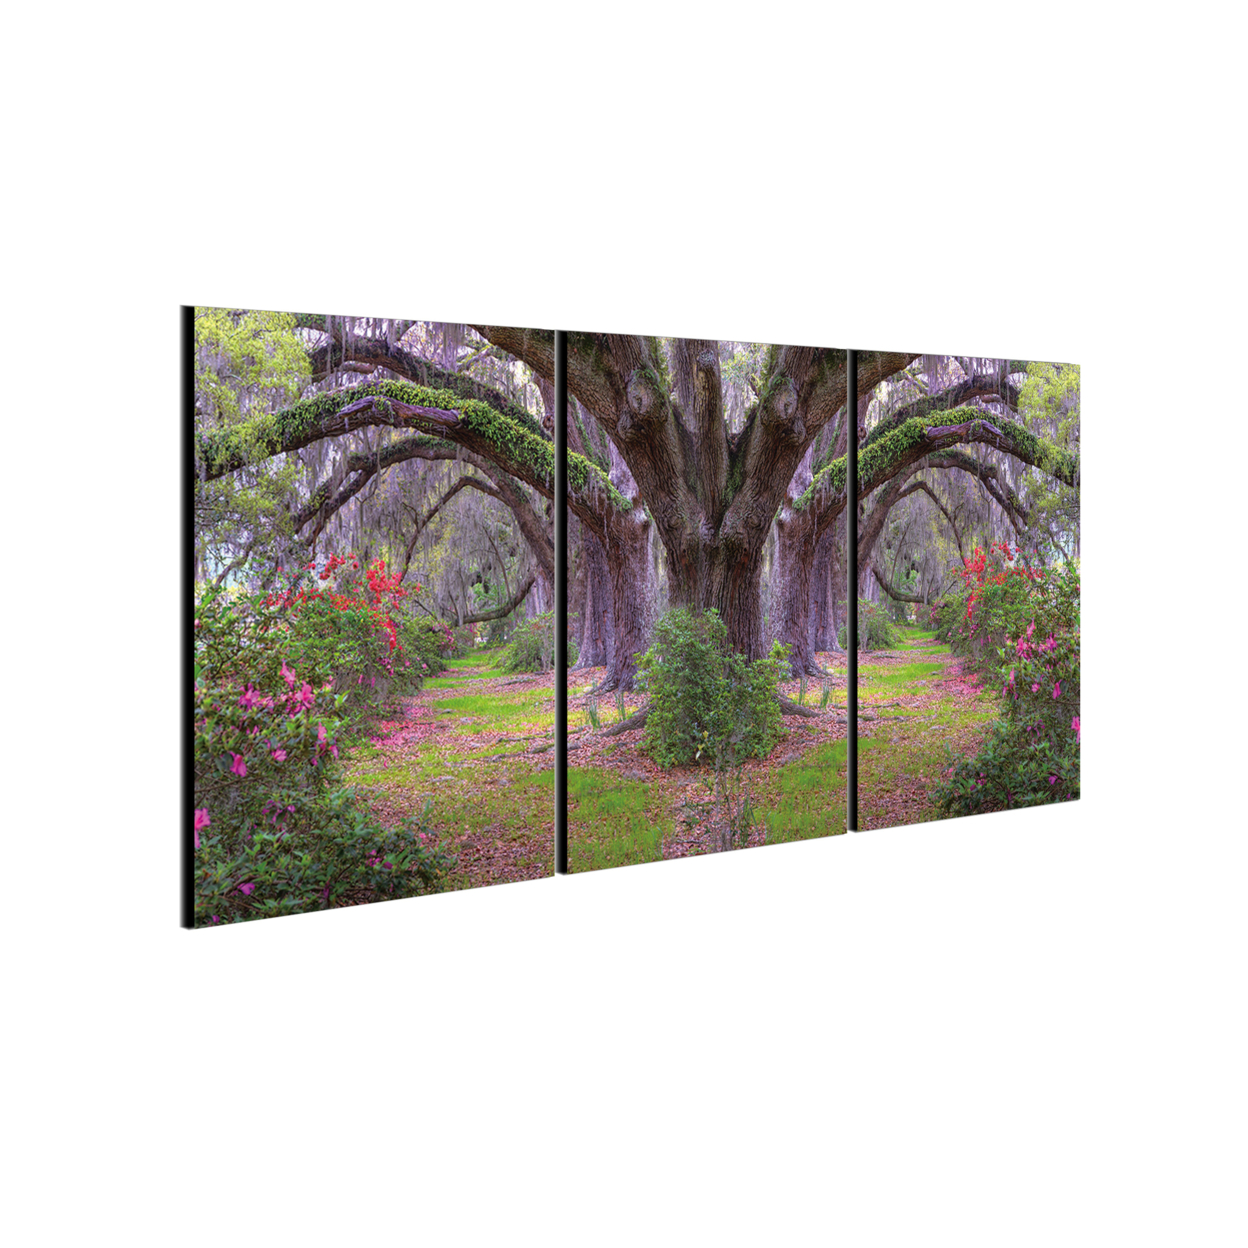 Lavender Cherry 3 Piece Wrapped Canvas Wall Art Print 27.5x60 Inches